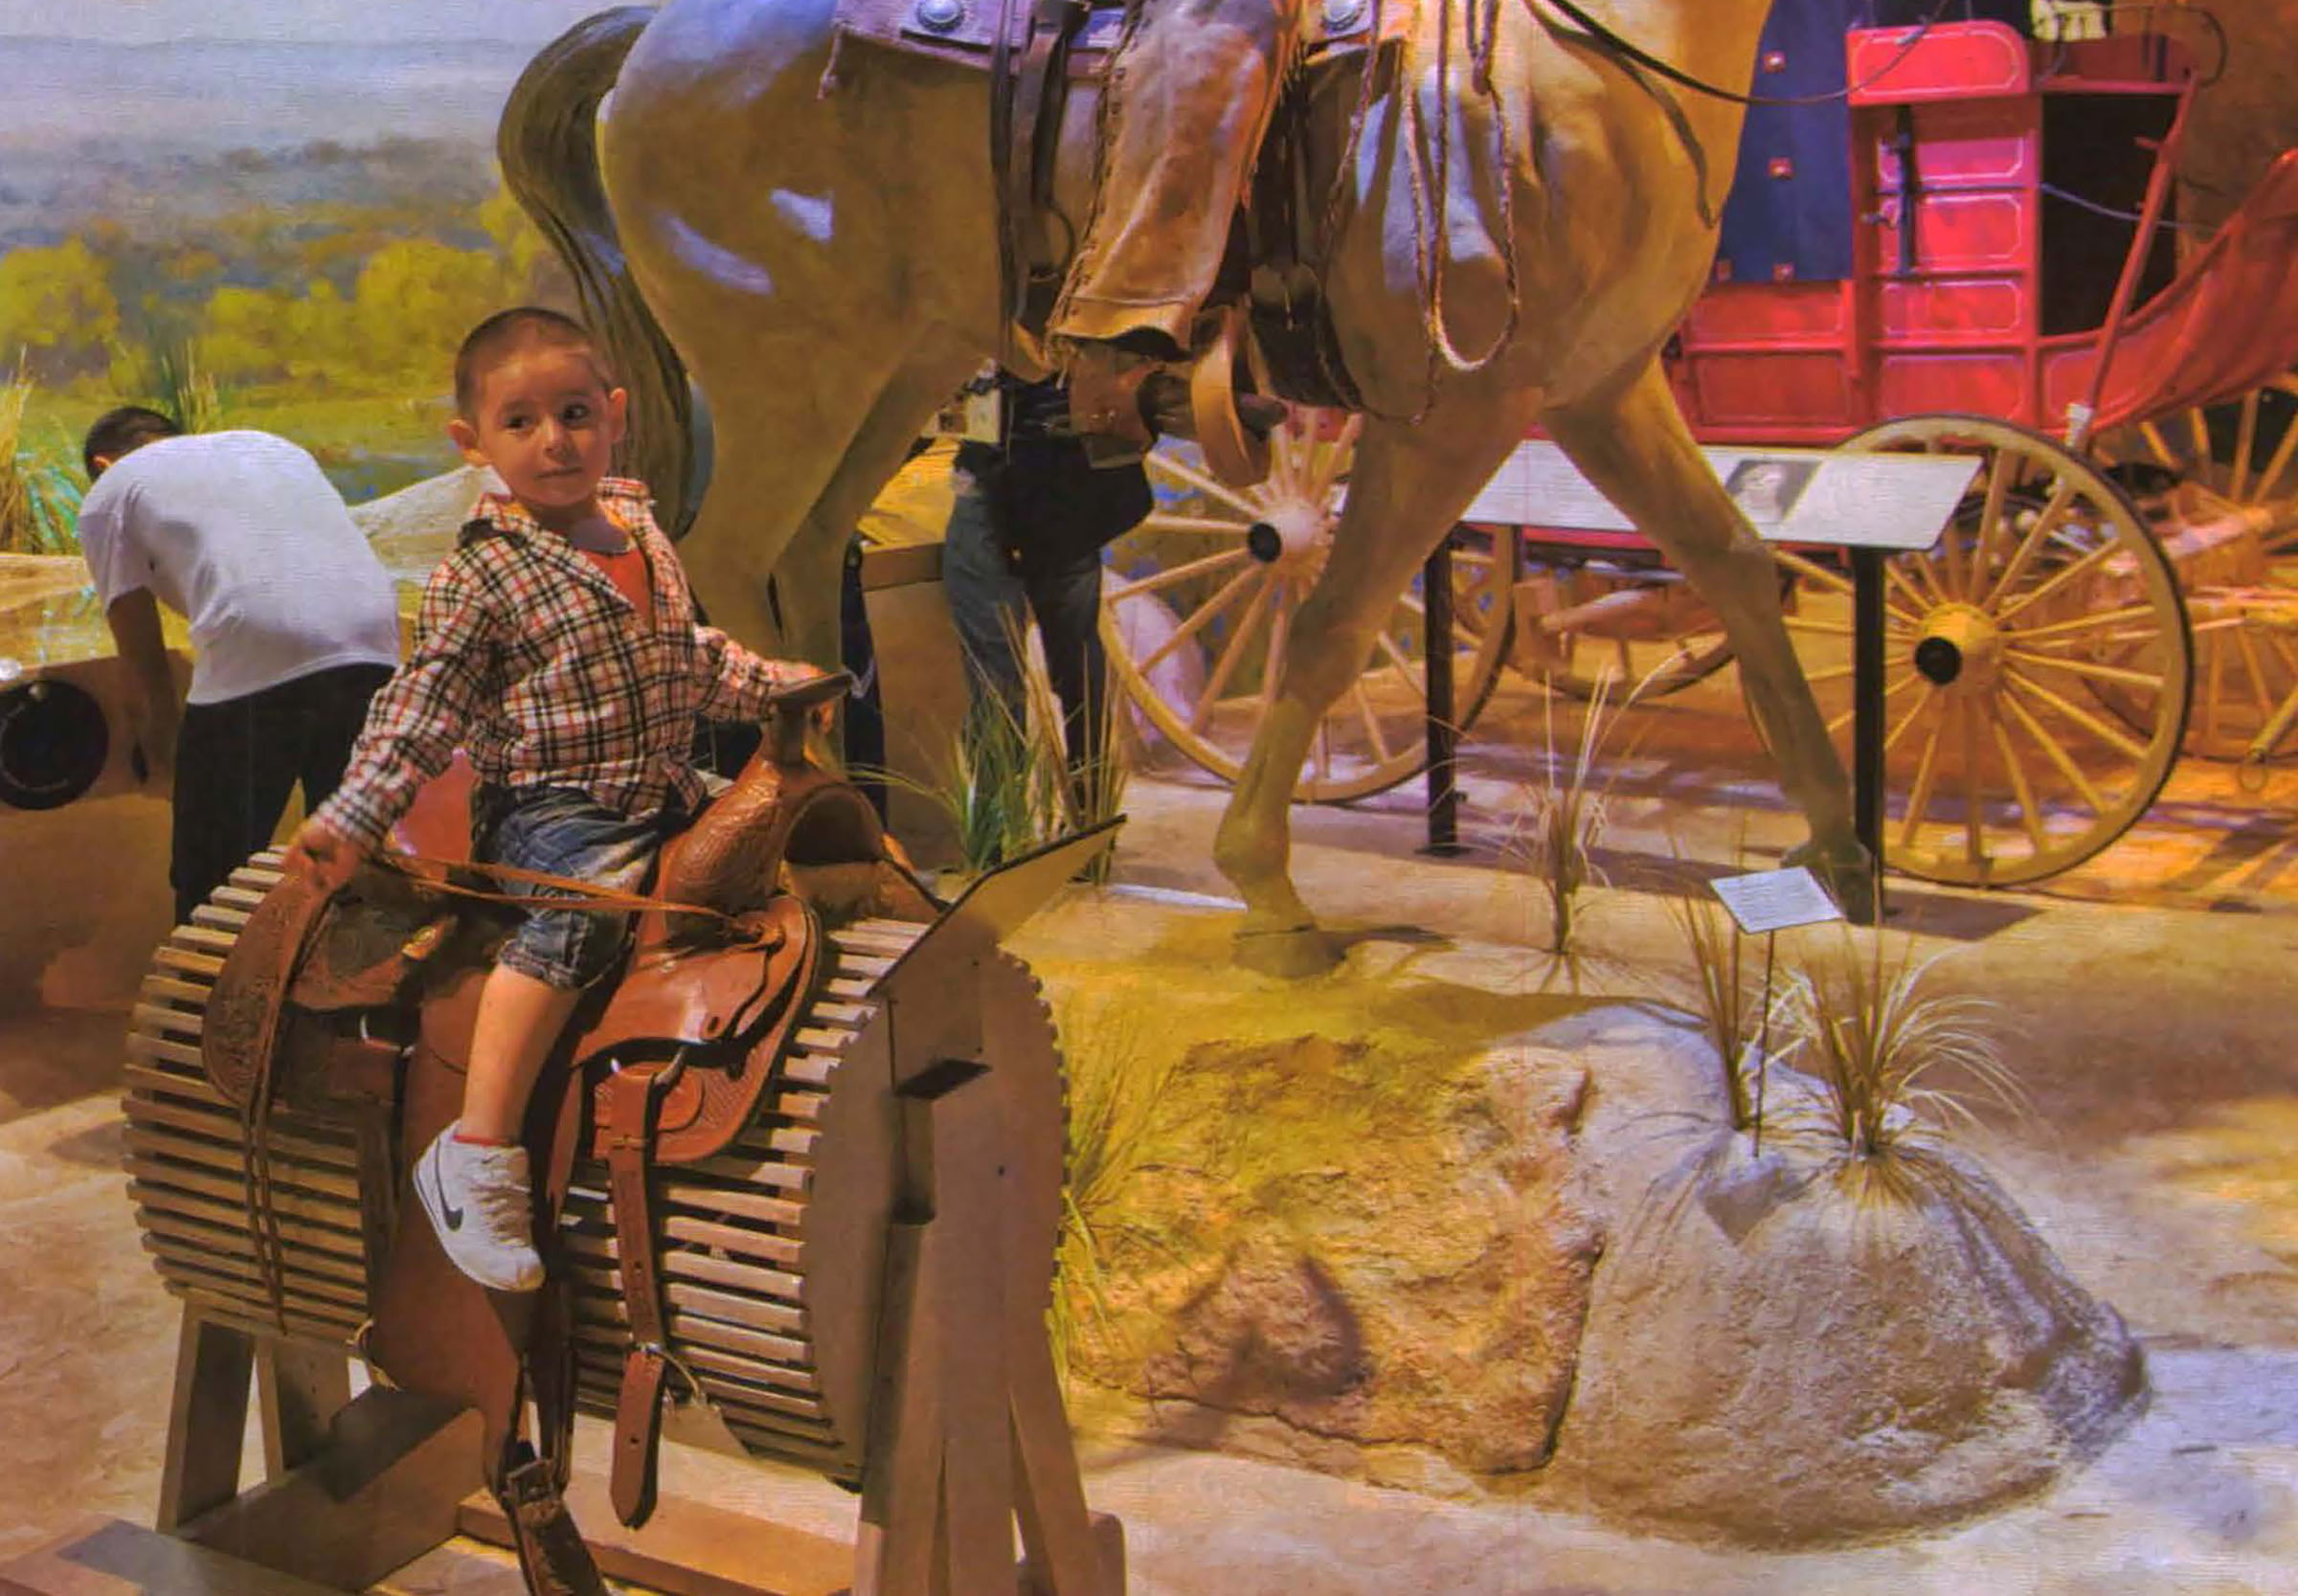 A child sits on a saddle in front of a statue